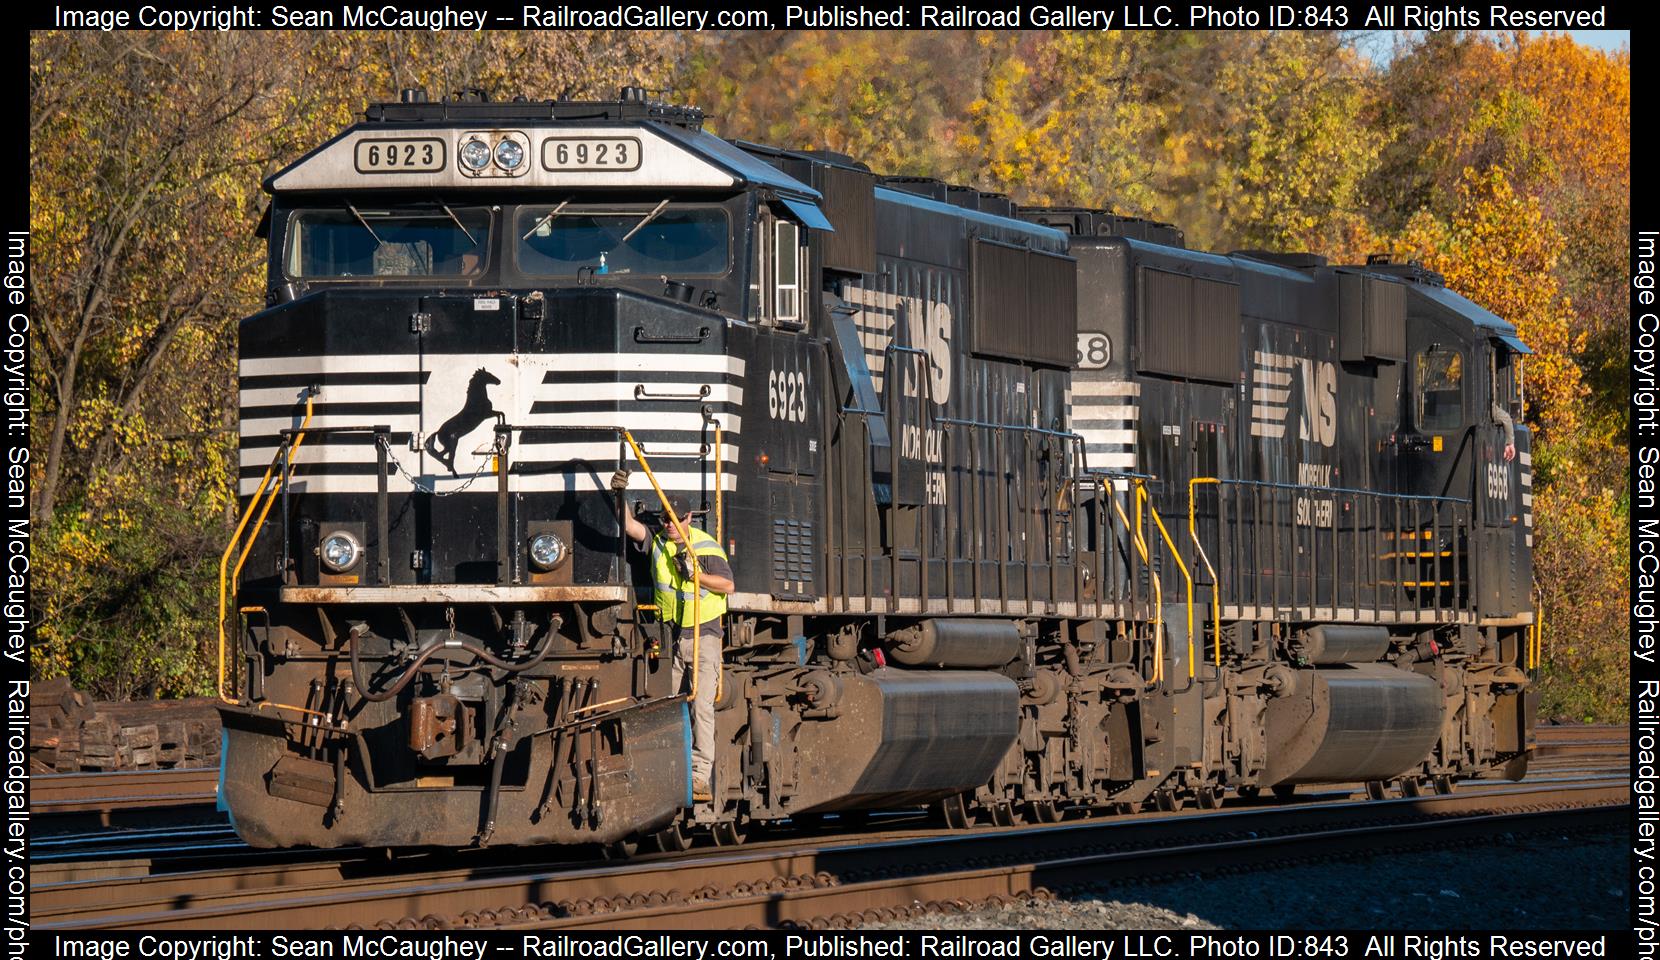 6923 is a class sd-60e and  is pictured in King of Prussia, Pennsylvania, United States.  This was taken along the Norfolk Southern Harrisburg Line on the Norfolk Southern Railway. Photo Copyright: Sean McCaughey uploaded to Railroad Gallery on 03/13/2023. This photograph of 6923 was taken on Saturday, October 29, 2022. All Rights Reserved. 